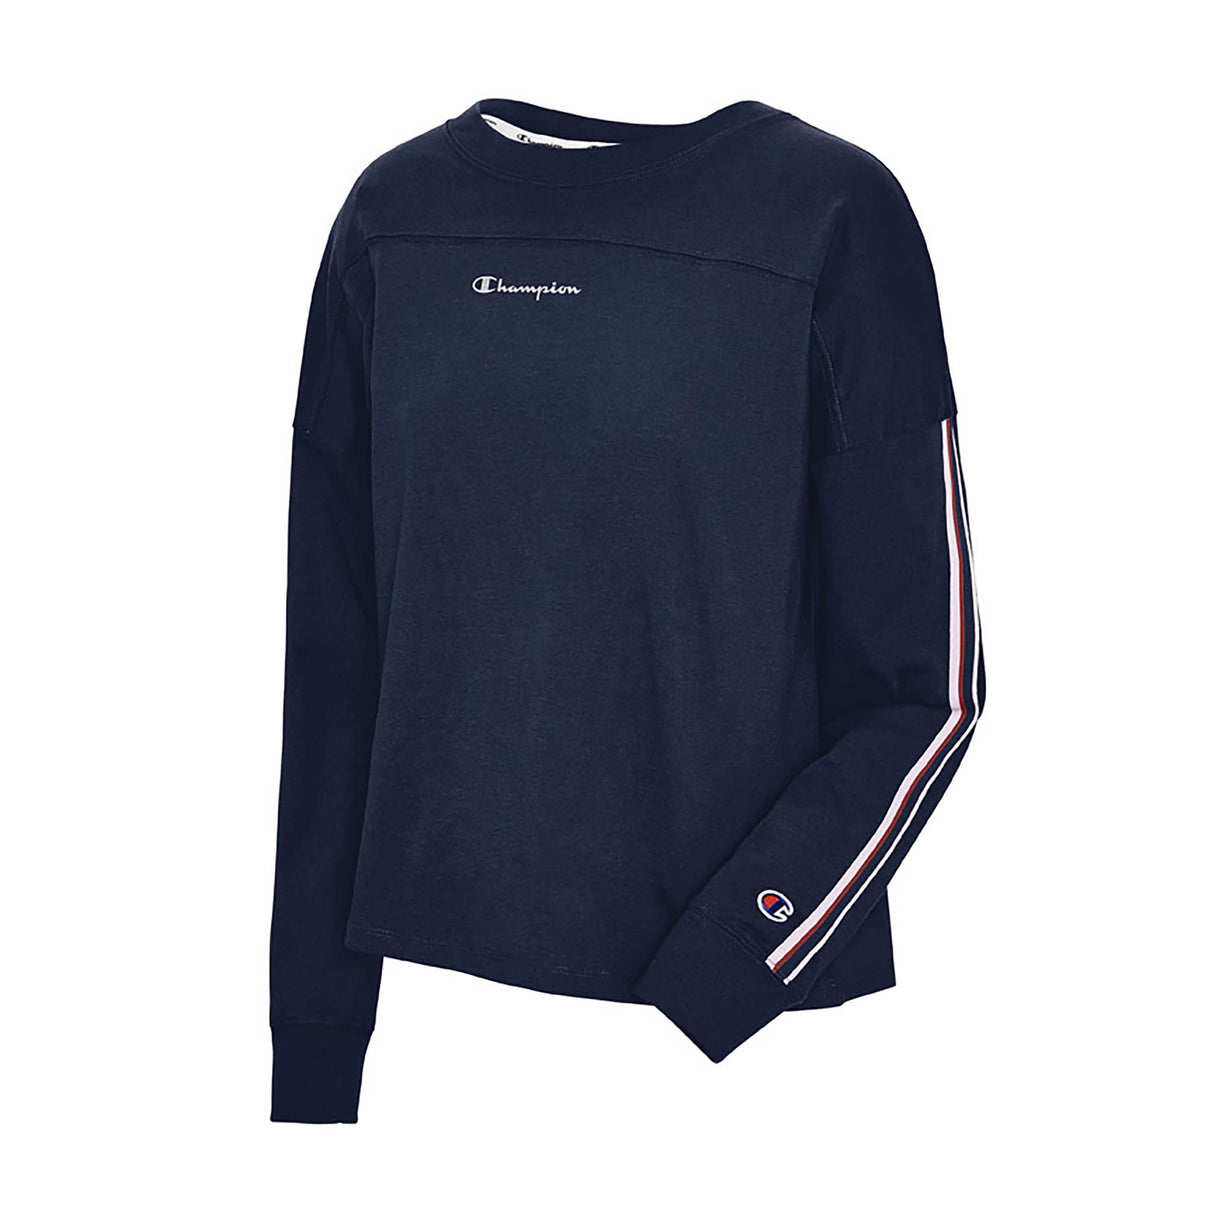 Champion Campus chandail a manches longues femme athletic navy